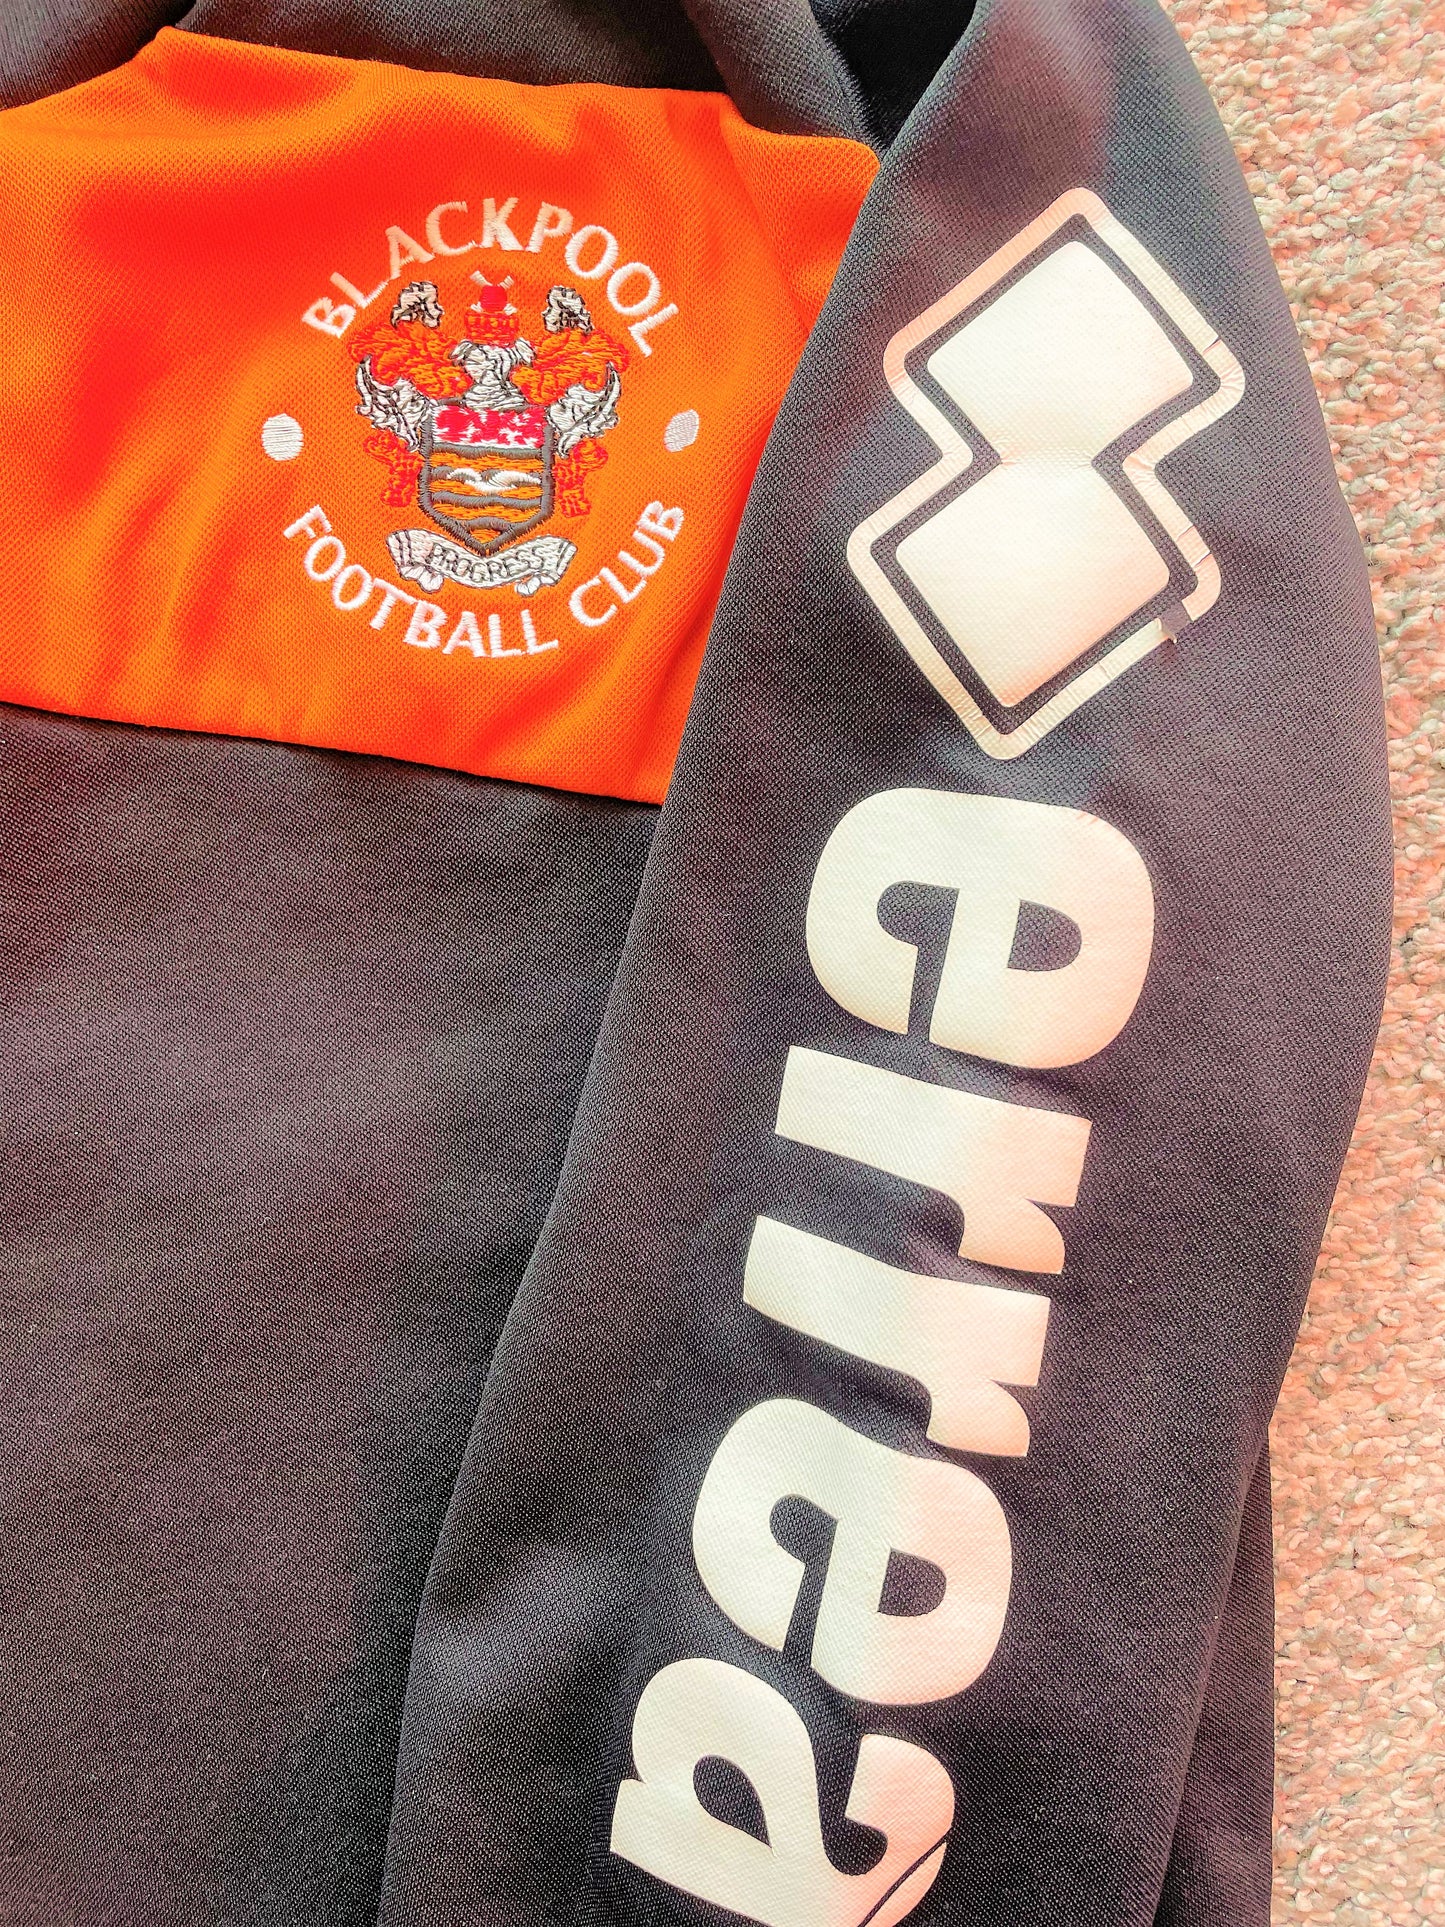 Blackpool Training Shirt 2016 (very good) Adults XXS/Youths. Height 22.5 inches.